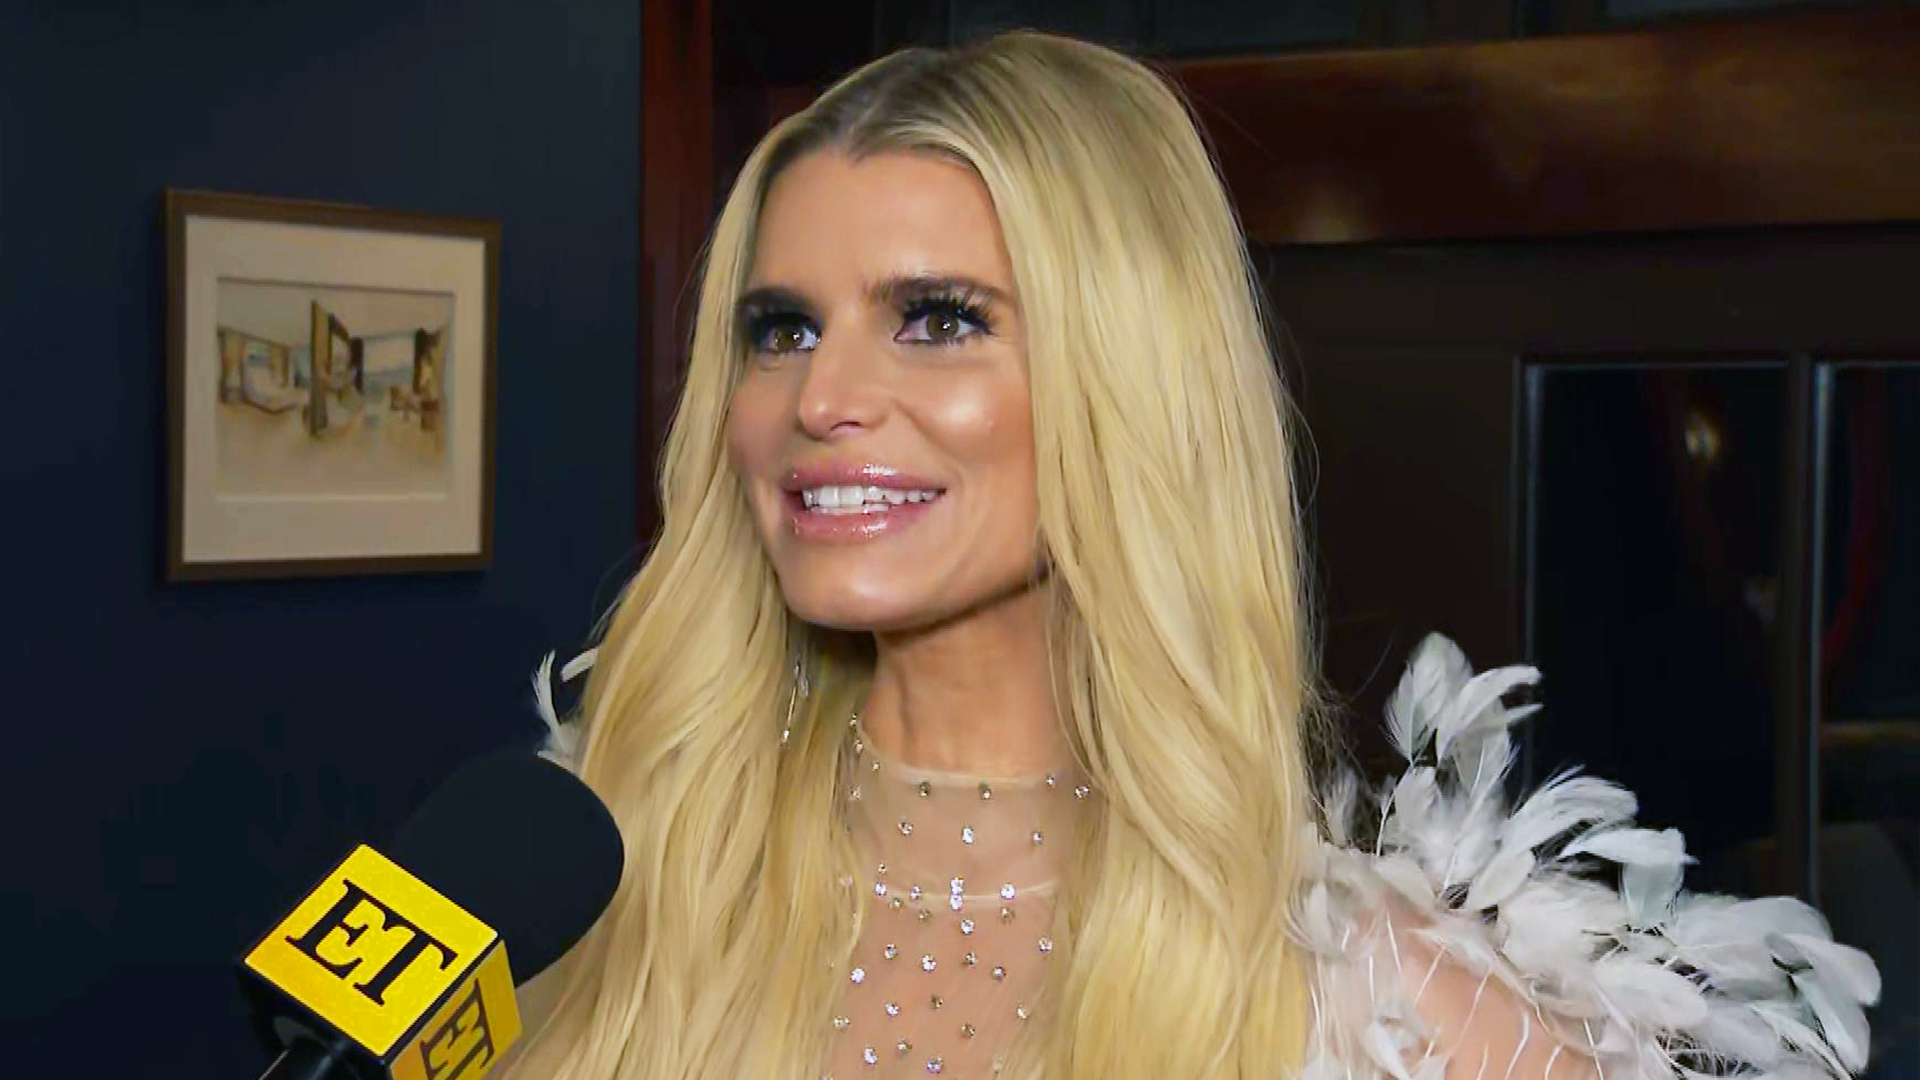 Jessica Simpson's fans continue to express concern